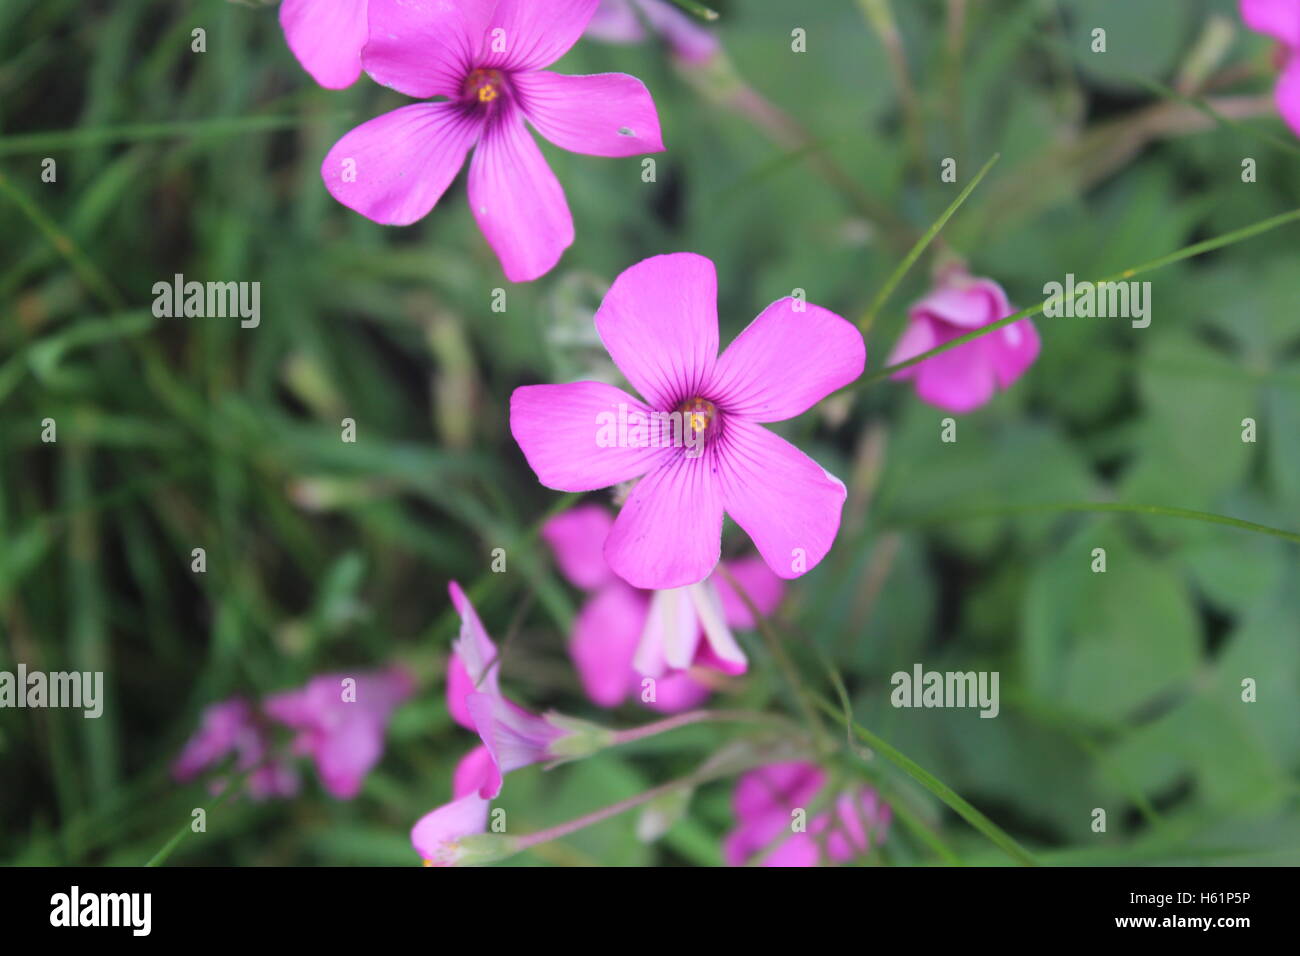 pretty pink flowers on a roadside verge in a rural village Stock Photo